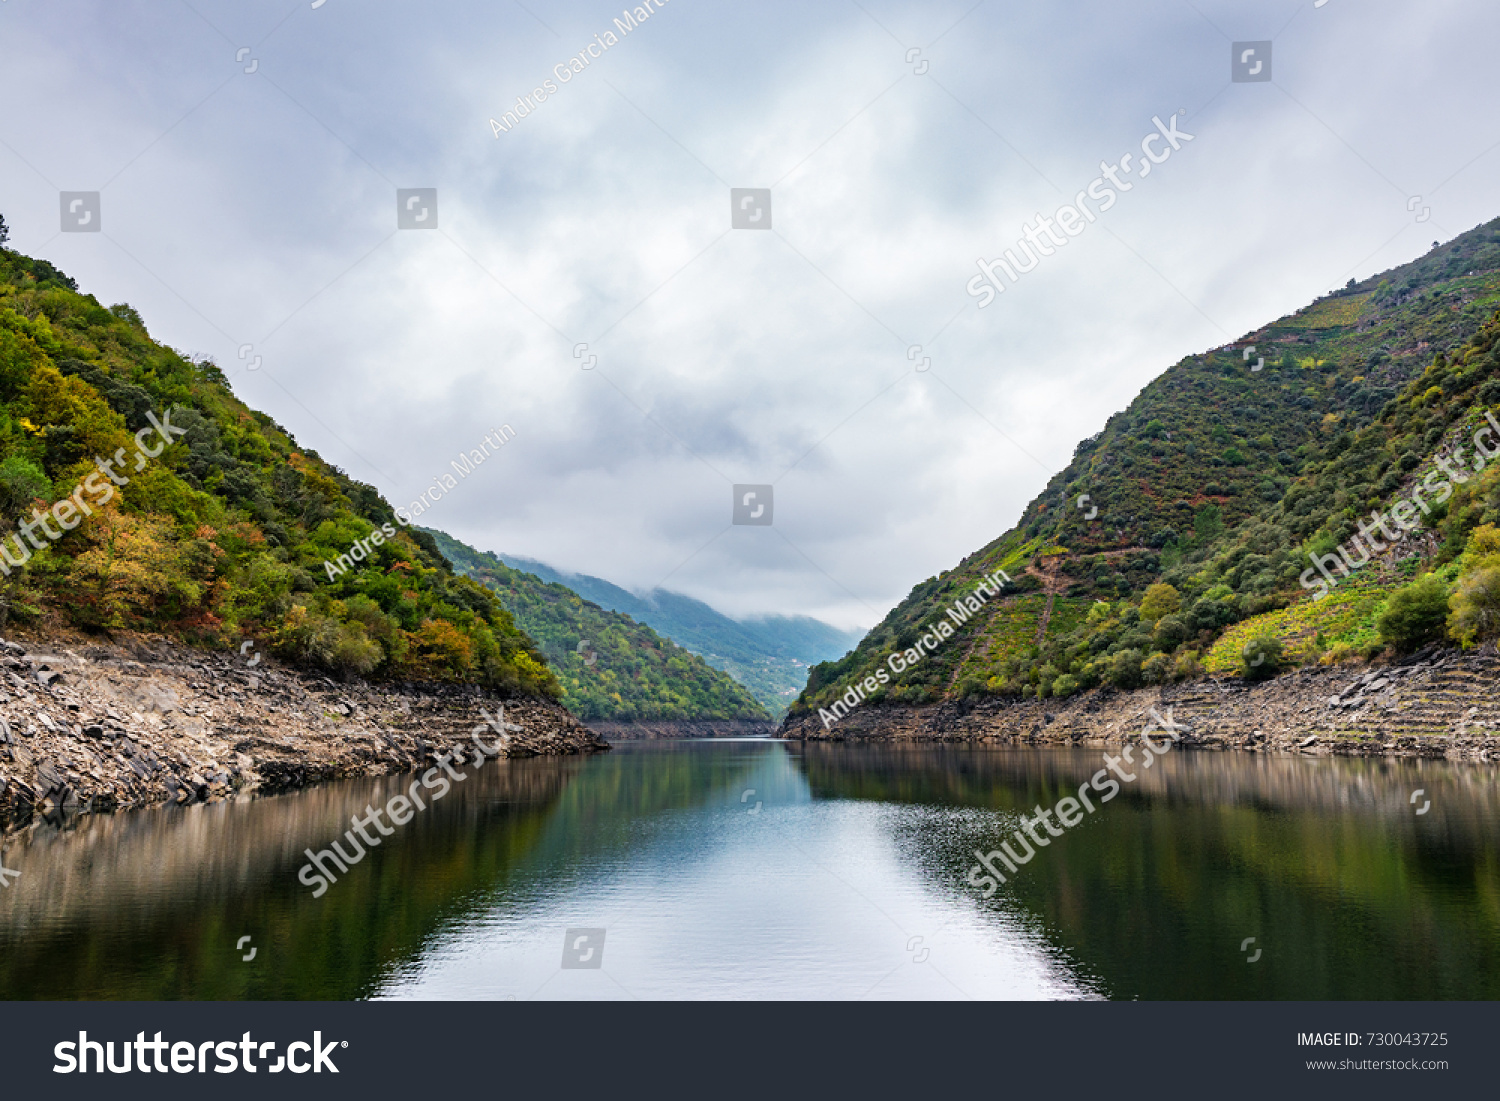 The river Sil acts as a natural border between the provinces of Ourense and Lugo in the Ribeira Sacra, with the riverbanks full of terraces with vineyards. #730043725